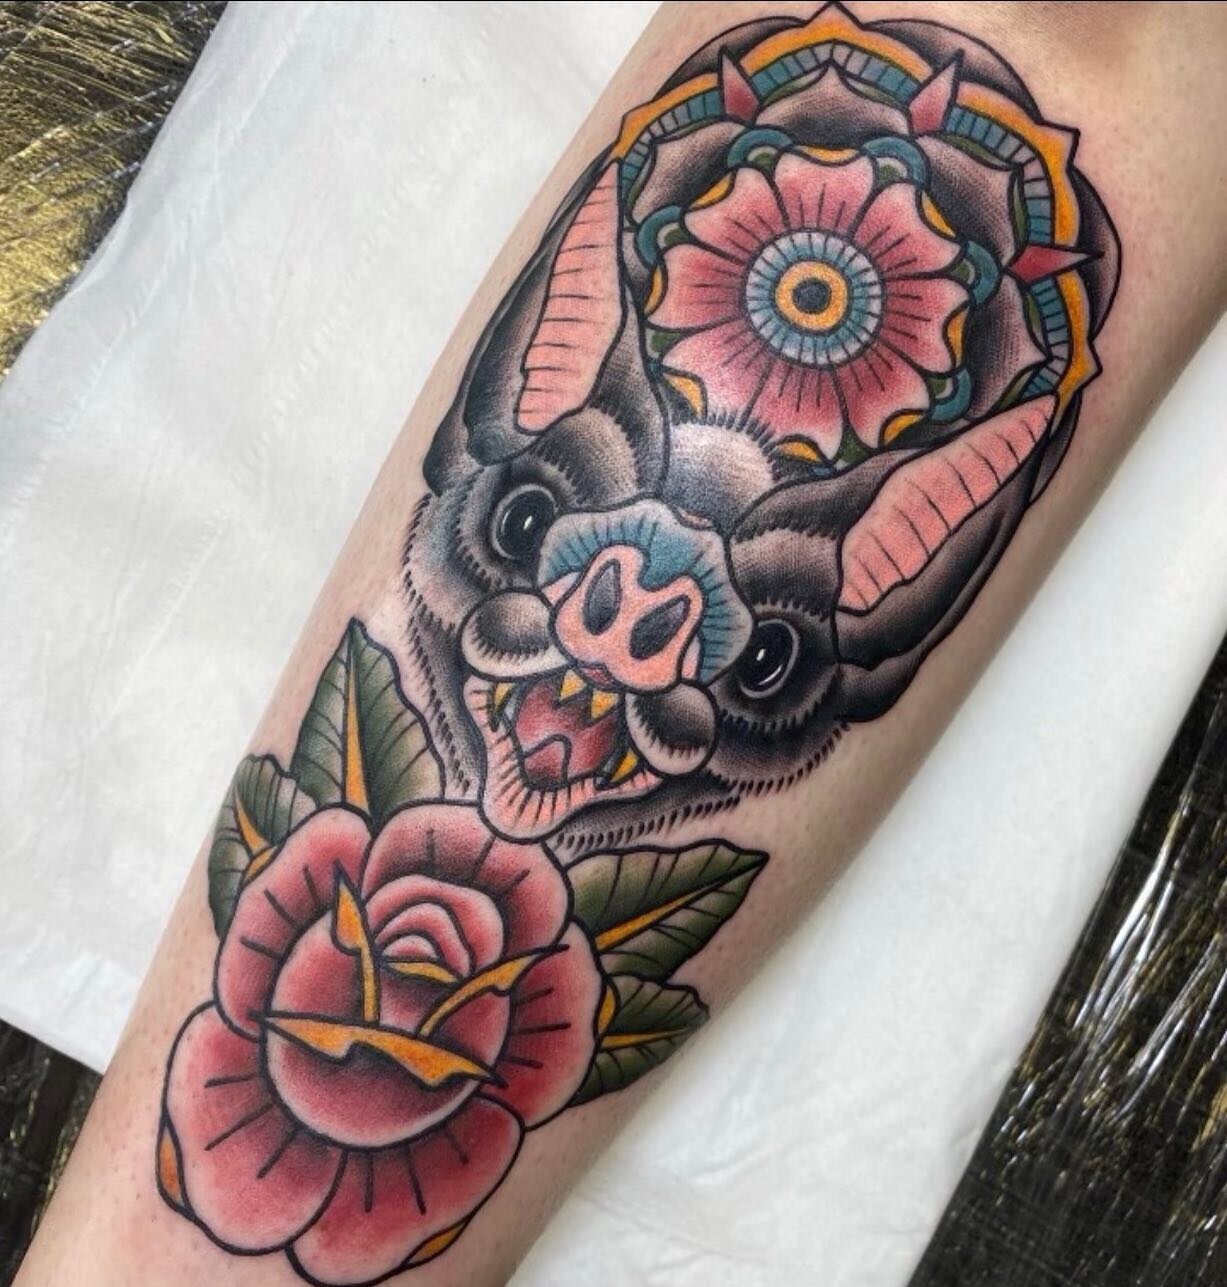 We are pleased to announce @steff_tattoos from @anvil_tattoo will be working @skindeep_uk Tattoo Freeze 2023🥶4th-5th February 2023, Telford International Centre, Telford.

To book in with Stephanie please email her on stefflapsley89@hotmail.com

#ta